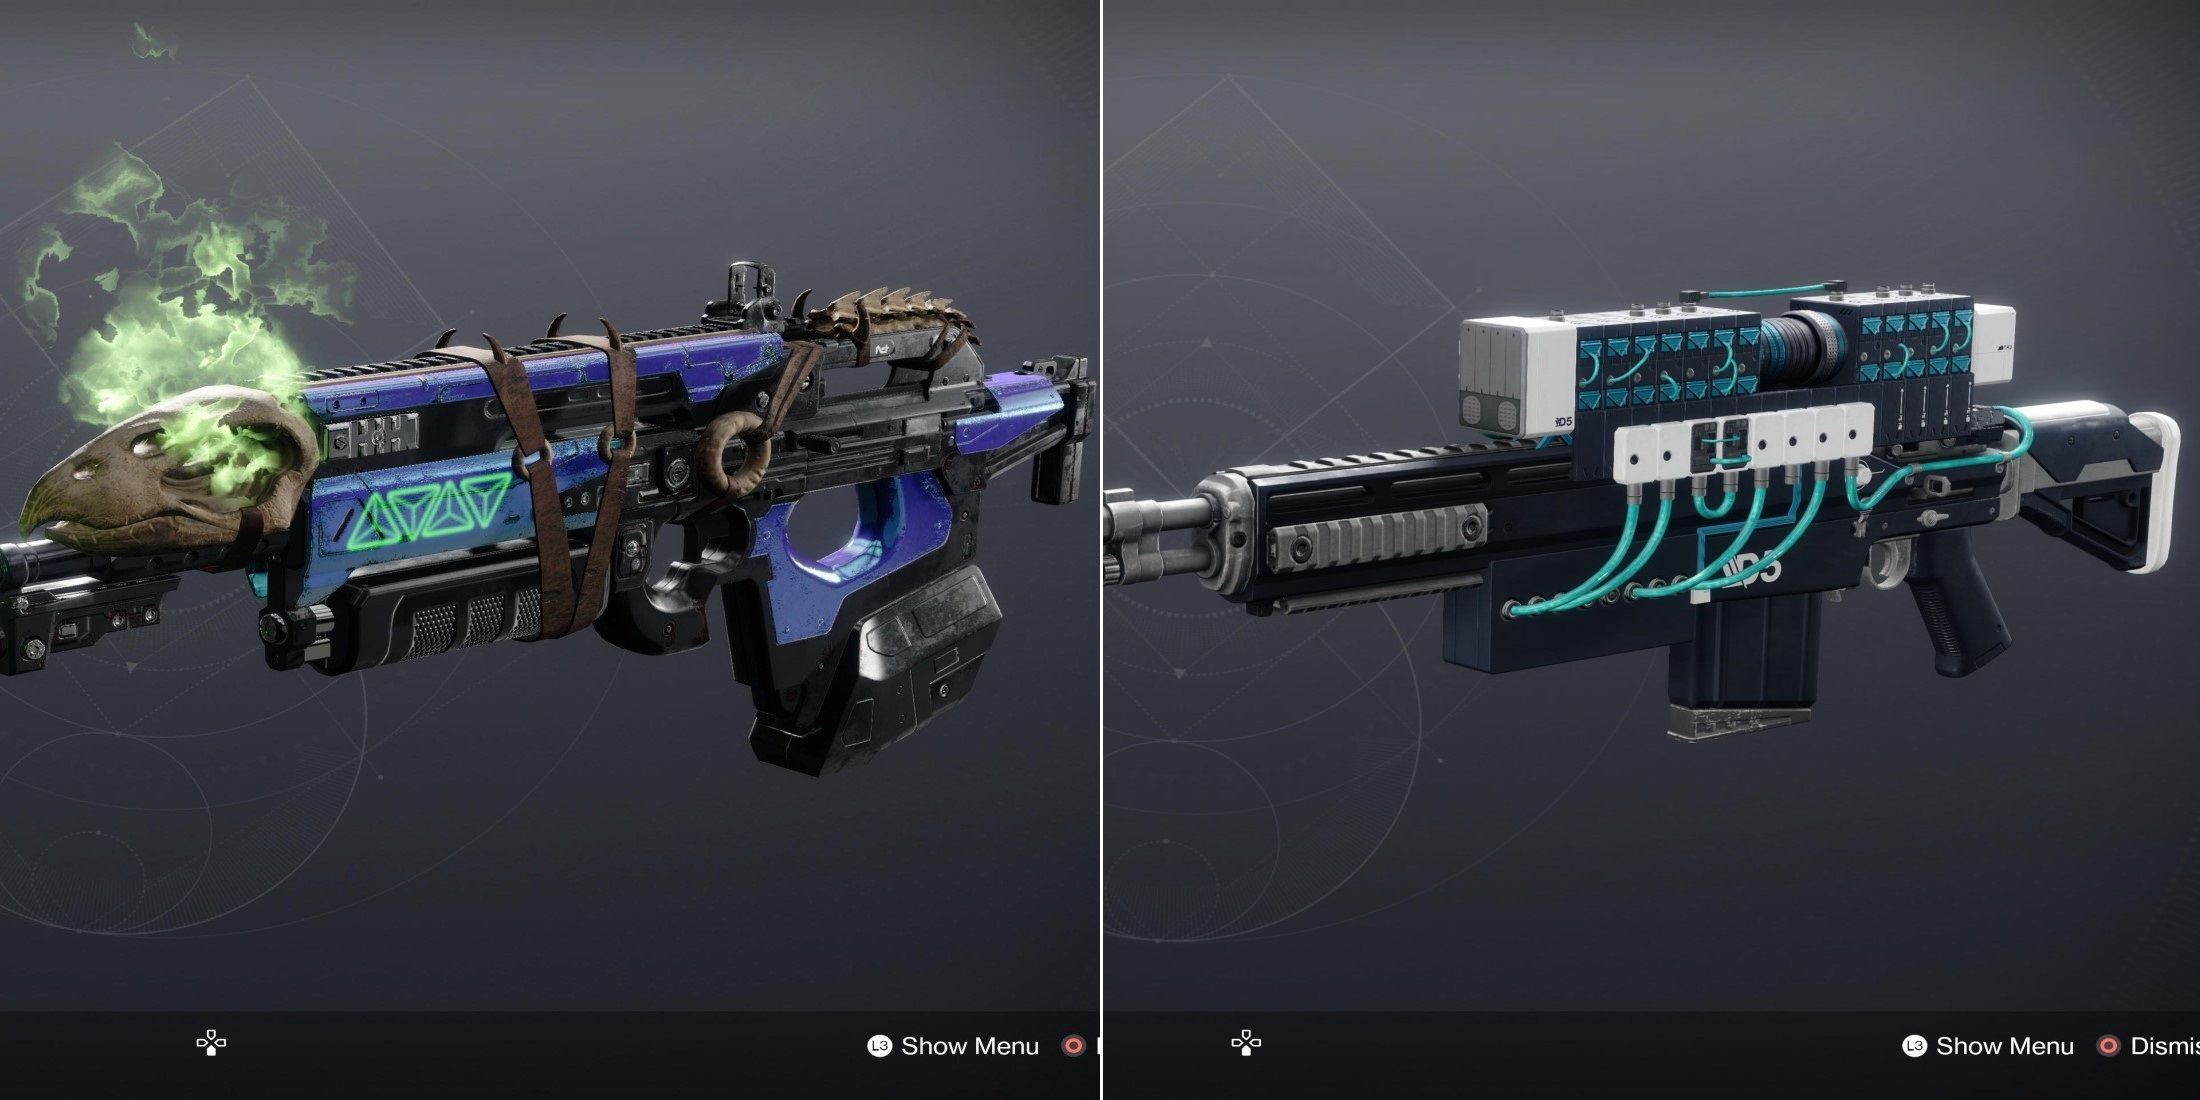 destiny 2 weapons that need a buff - bad juju (left) and DARCI (right)